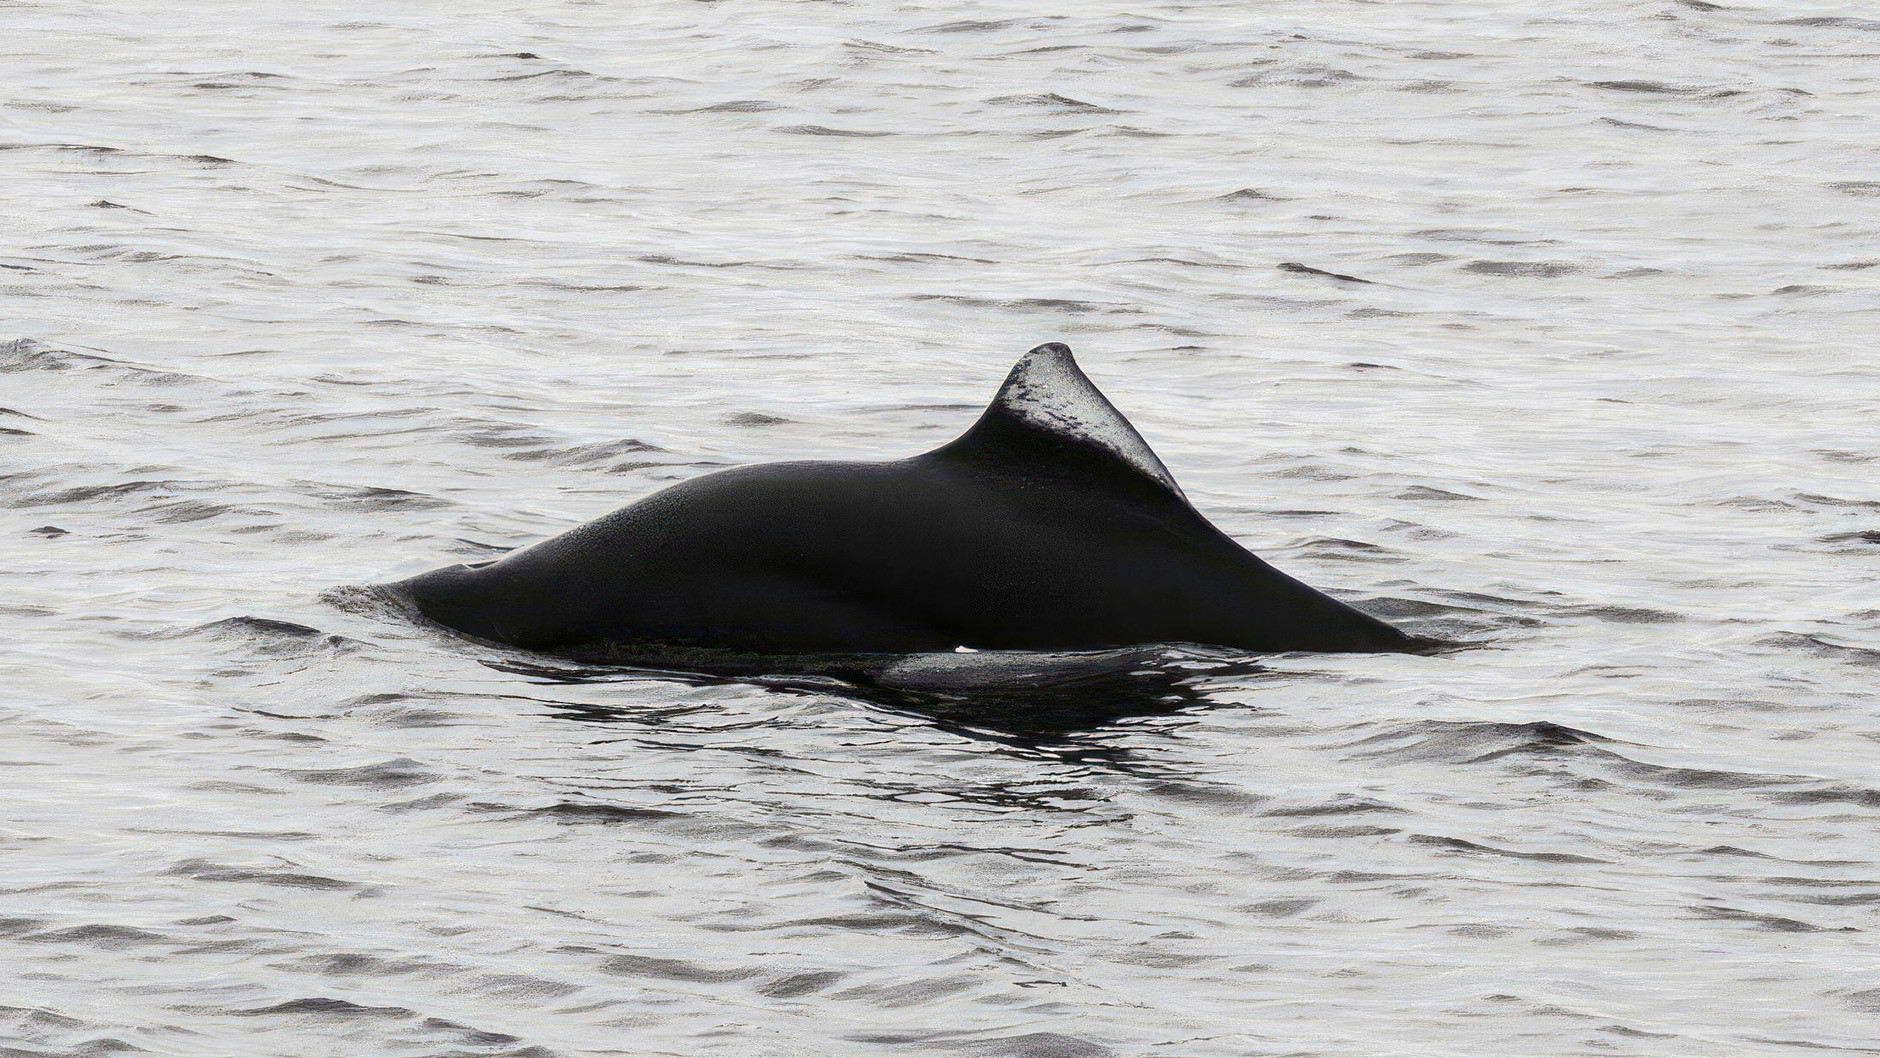 A close-up of a Dall's porpoise on the surface